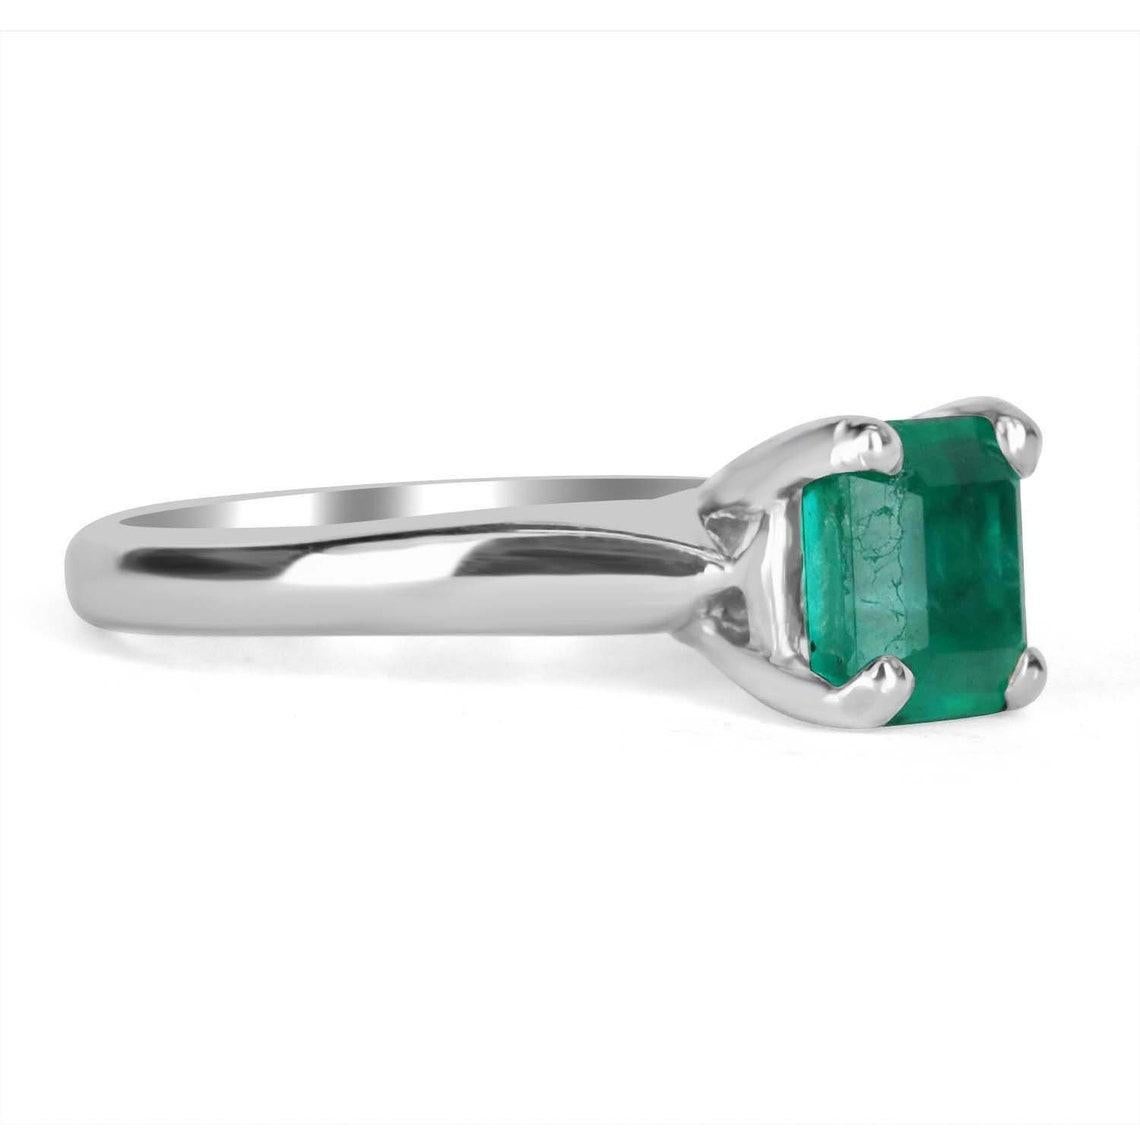 Displayed is this beautiful solitaire Colombian emerald ring. A full 1.95-carat Asscher cut Colombian emerald steals the show, with its gorgeous medium-dark green color and very good luster. It is delicately prong set into a platinum solitaire